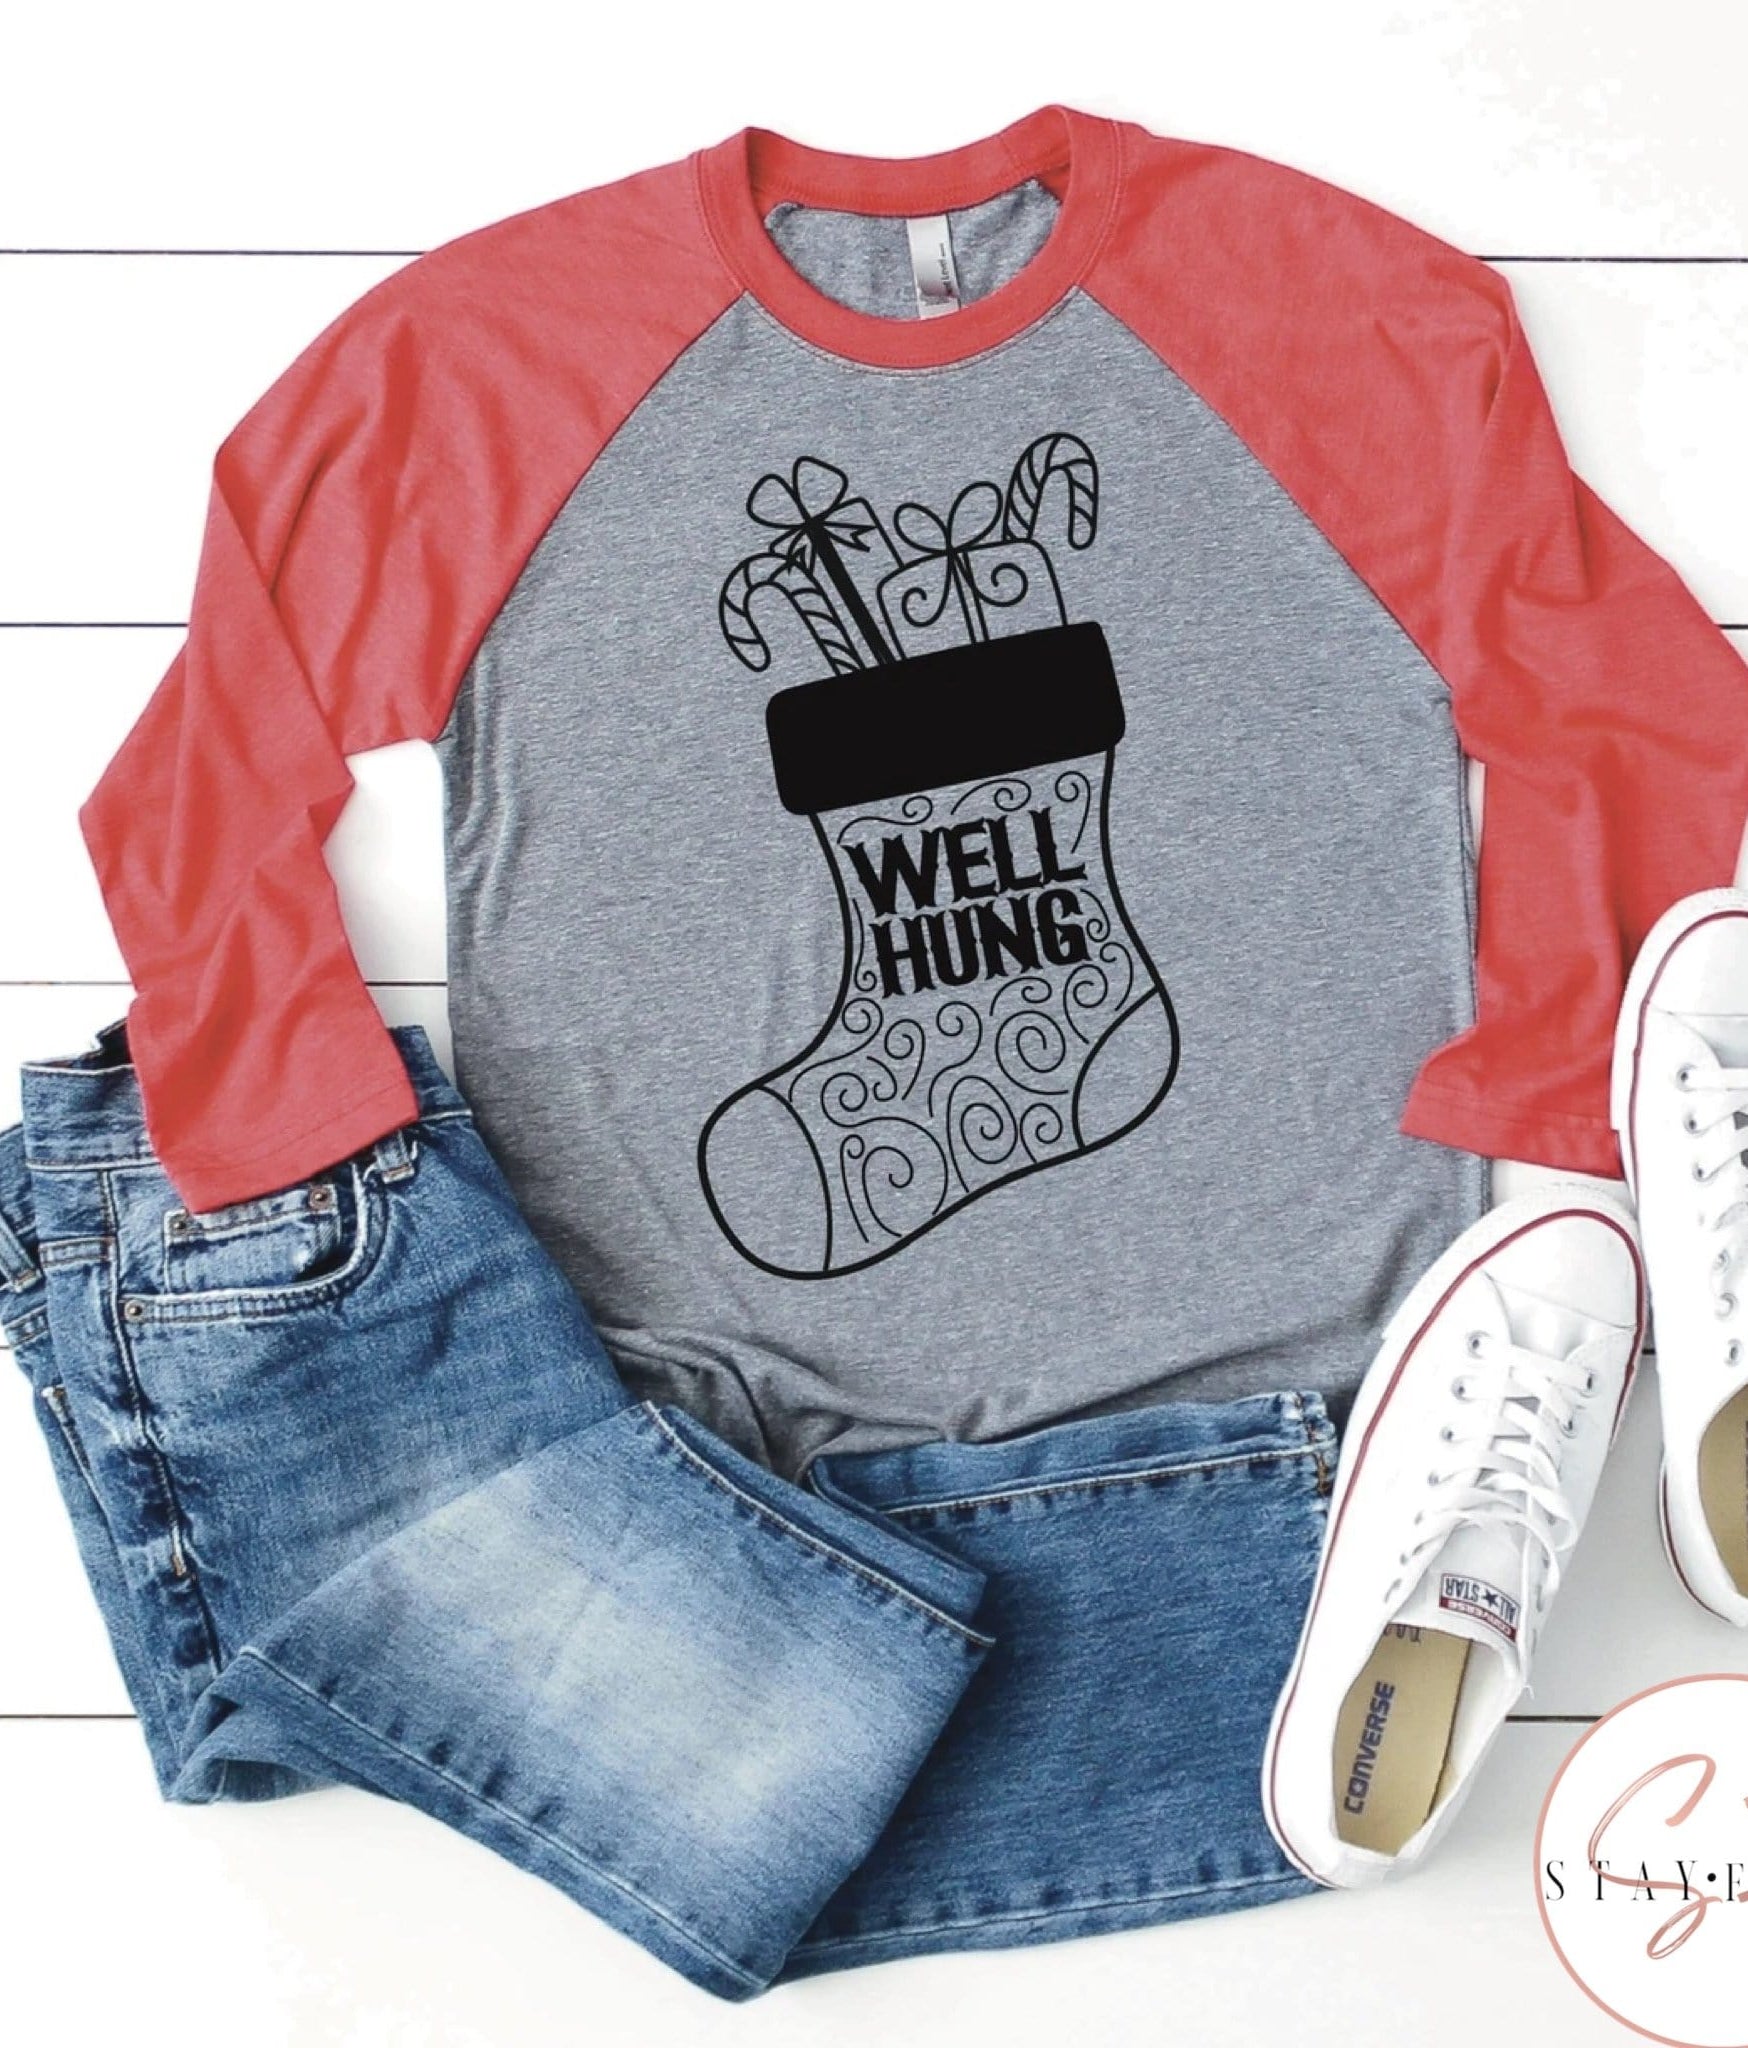 Well Hung Graphic T #284-Graphic T-Stay Foxy Boutique, Florissant, Missouri